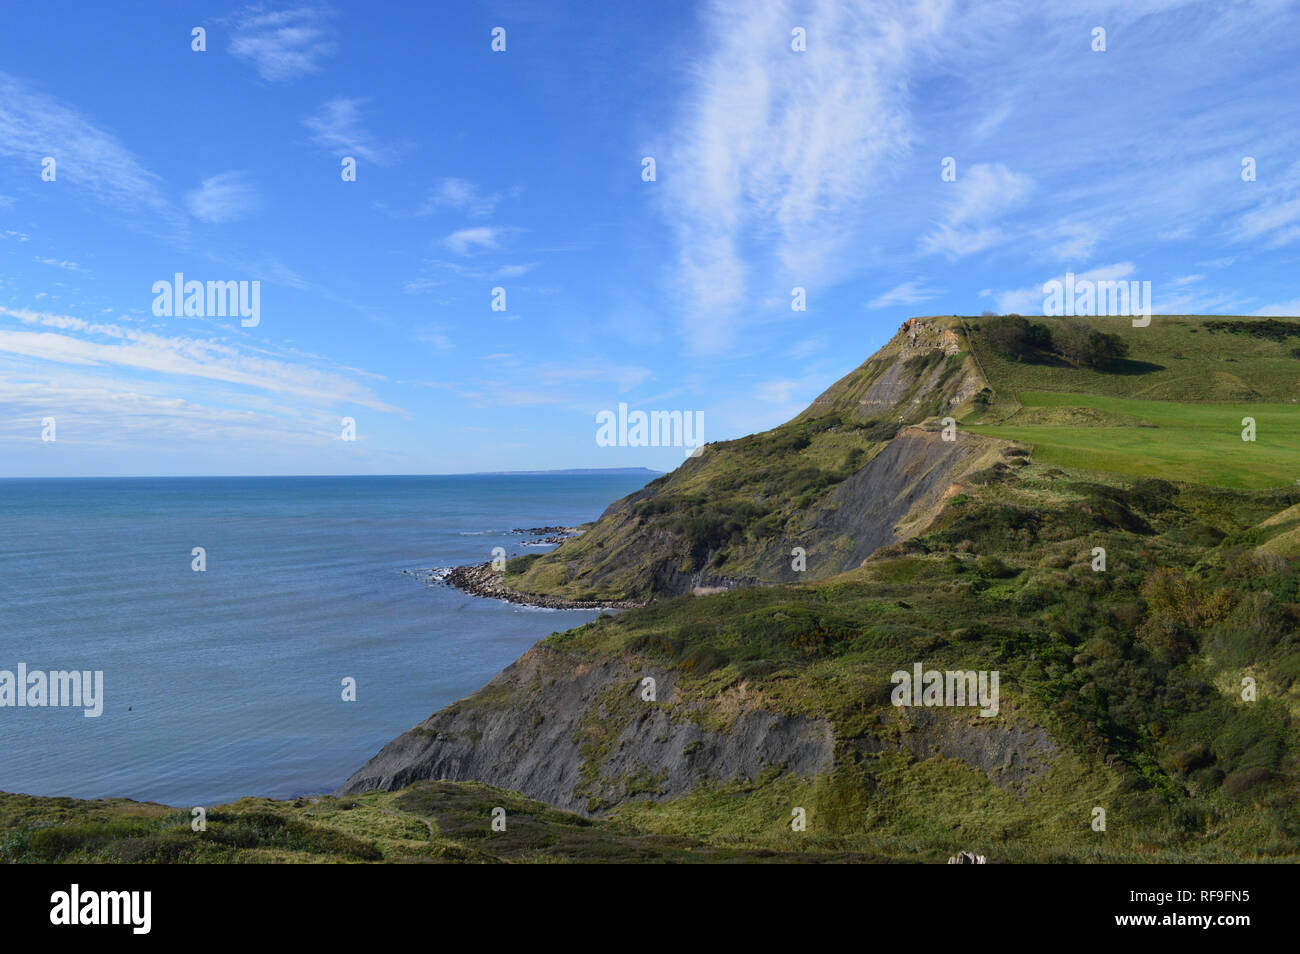 Houns-tout Cliff above Egmont Point from Emmetts Hill on the South West Costal Path in Dorset, England, UK. Stock Photo